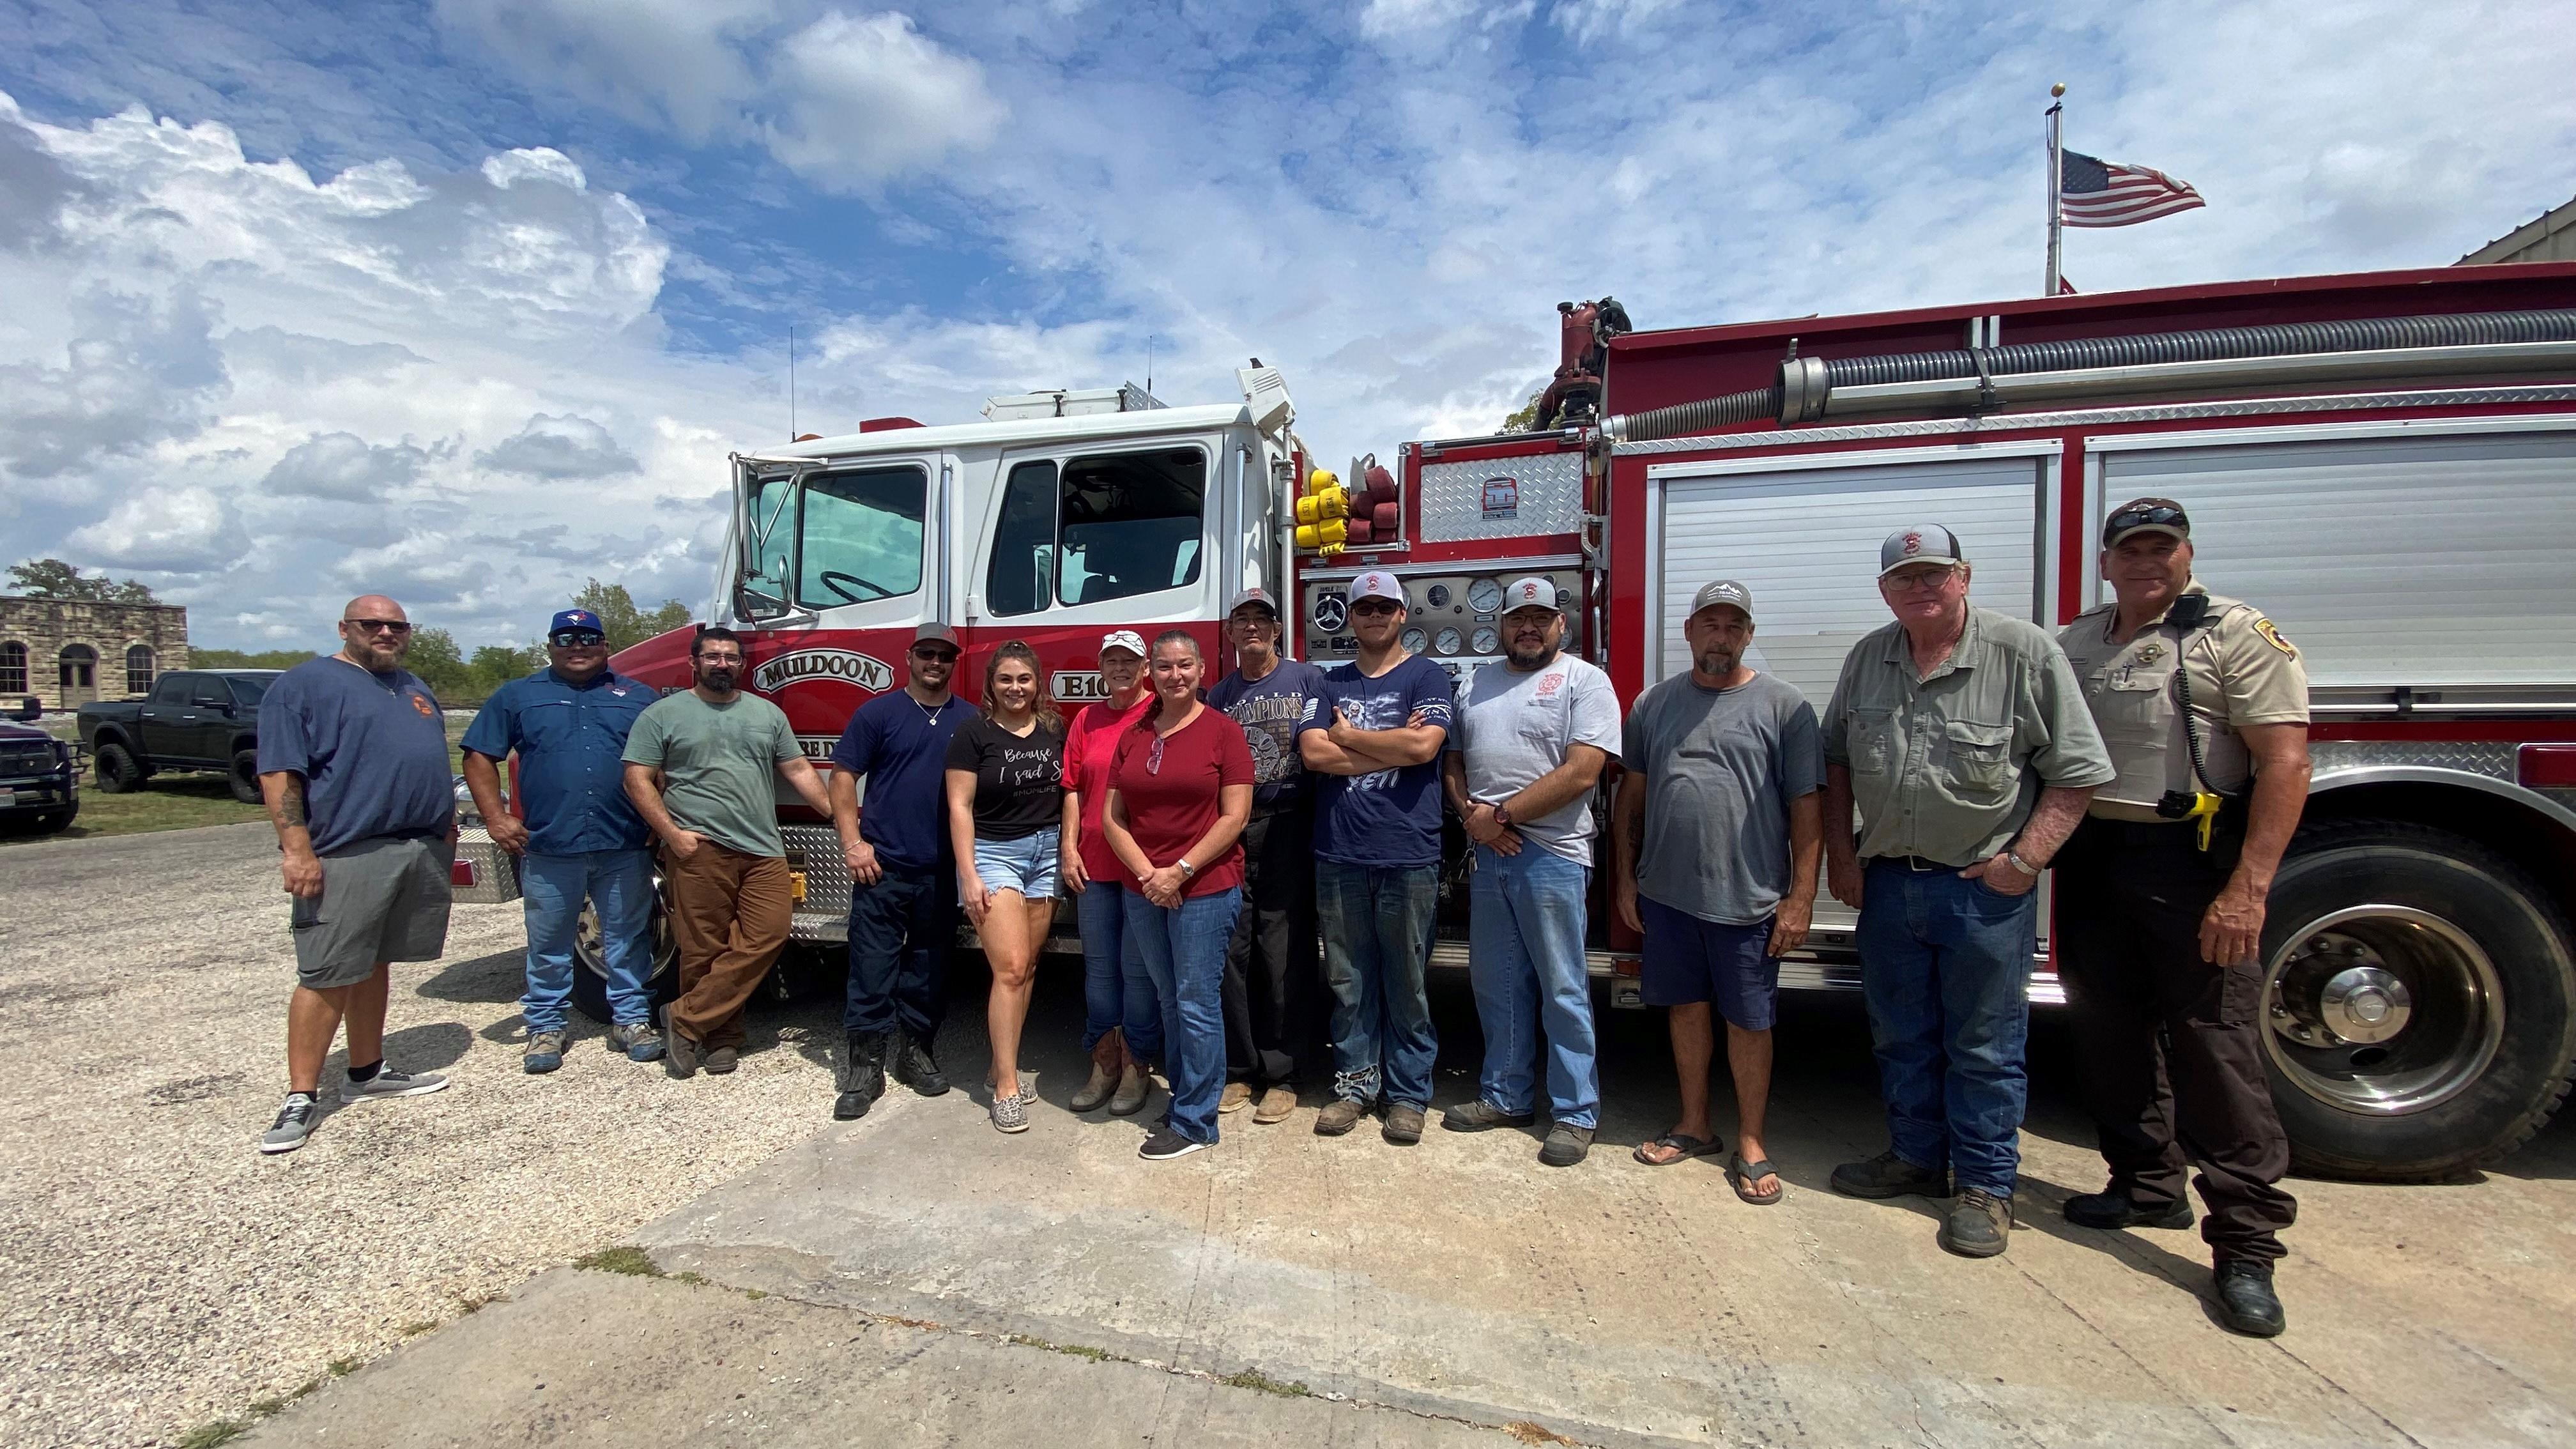 Muldoon Fire Dept. Group | O